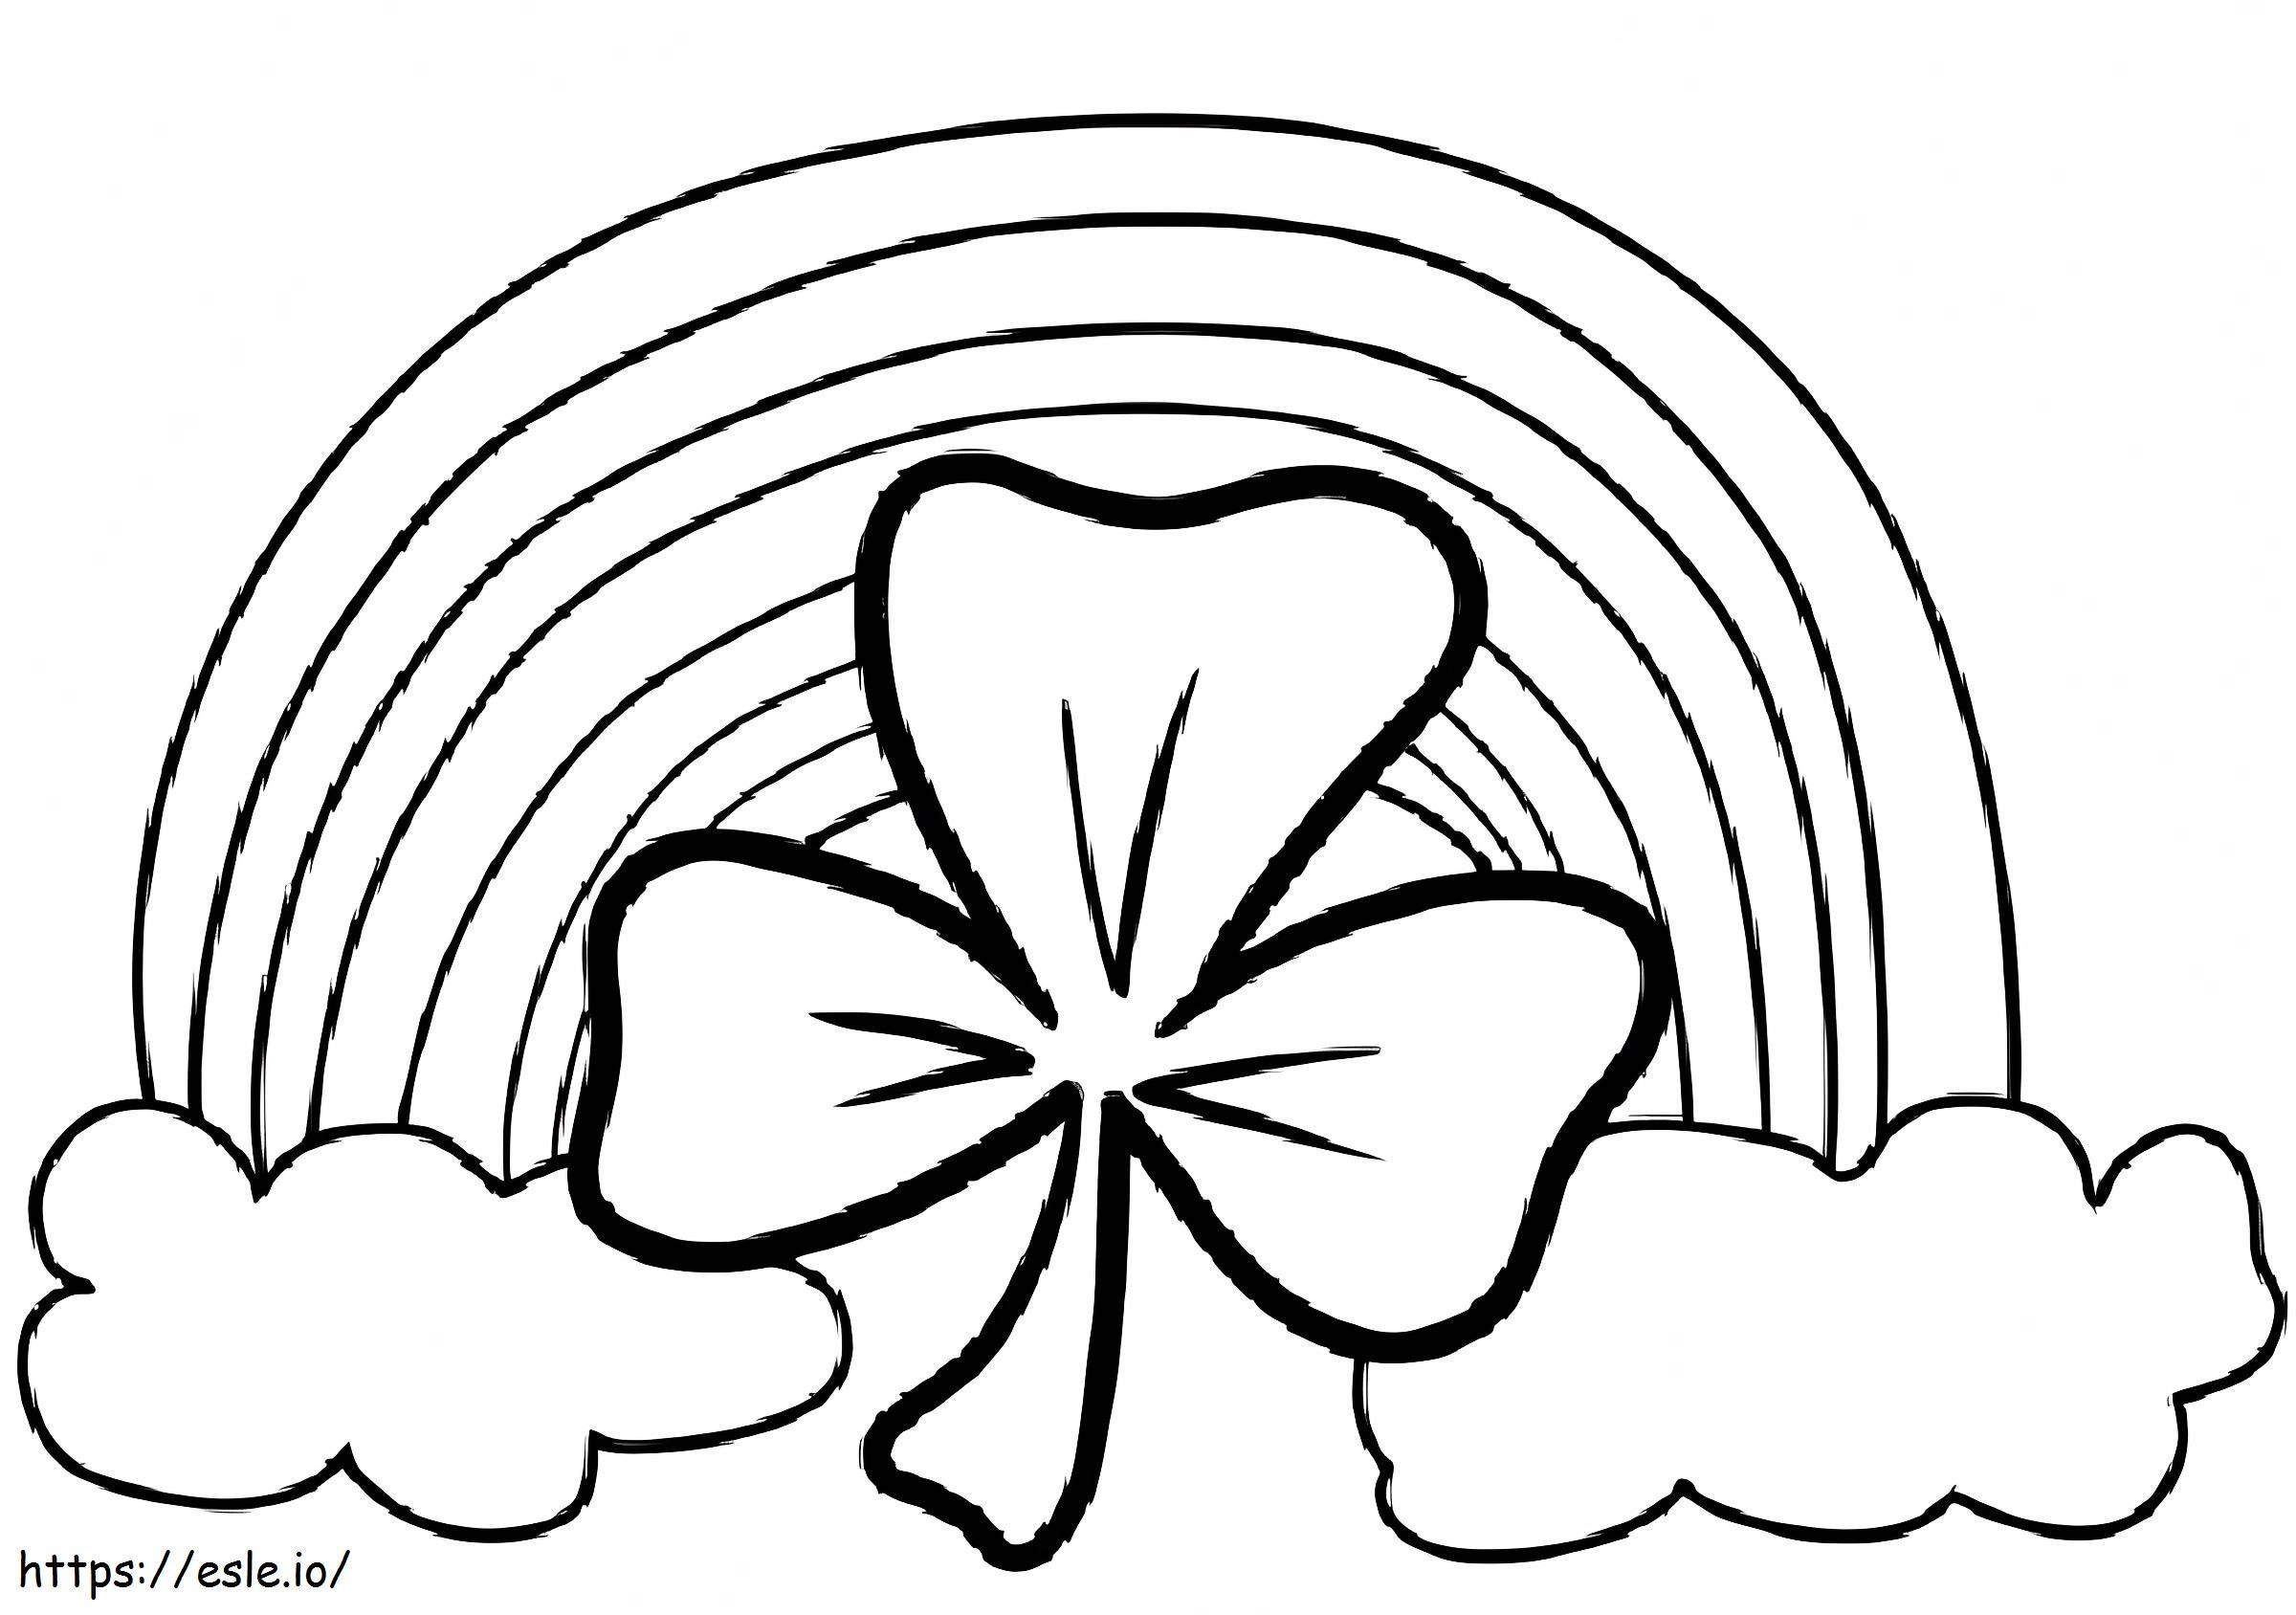 Four Leaf Clover And Rainbow coloring page